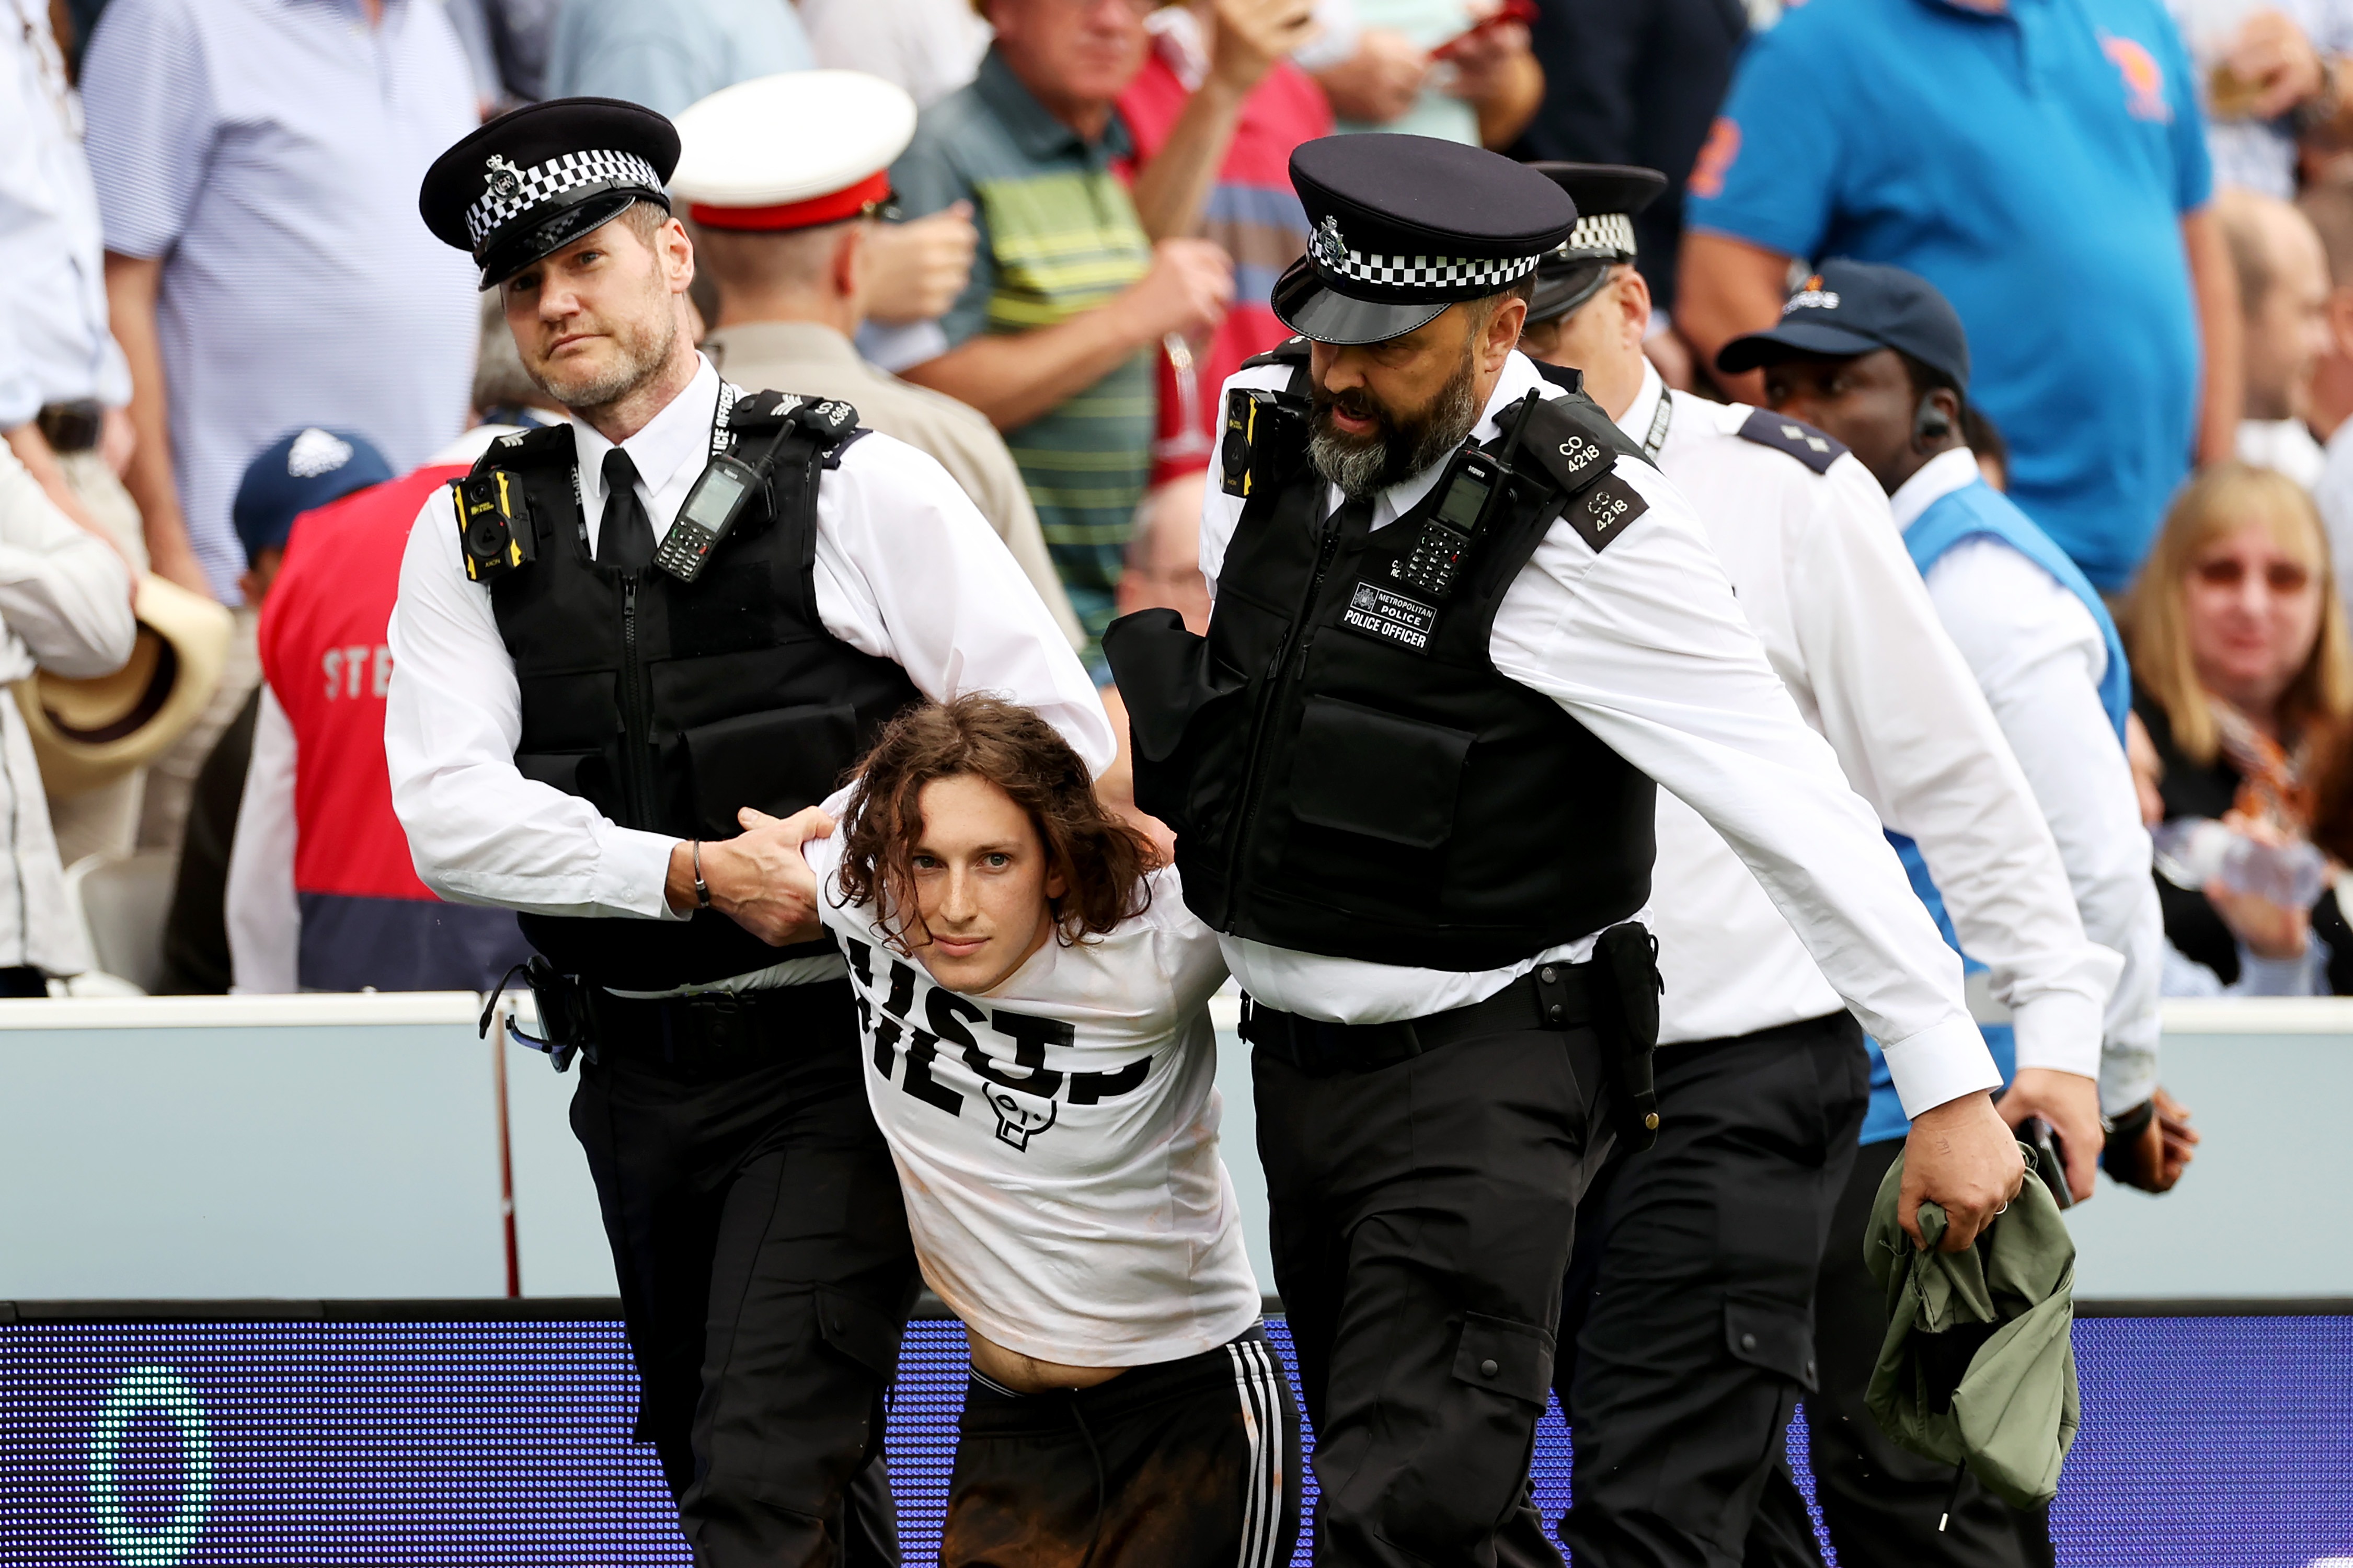 LONDON, ENGLAND - JUNE 28: A "Just Stop Oil" protester is taken away by Police officers during Day One of the LV= Insurance Ashes 2nd Test match between England and Australia at Lord's Cricket Ground on June 28, 2023 in London, England. (Photo by Ryan Pierse/Getty Images)